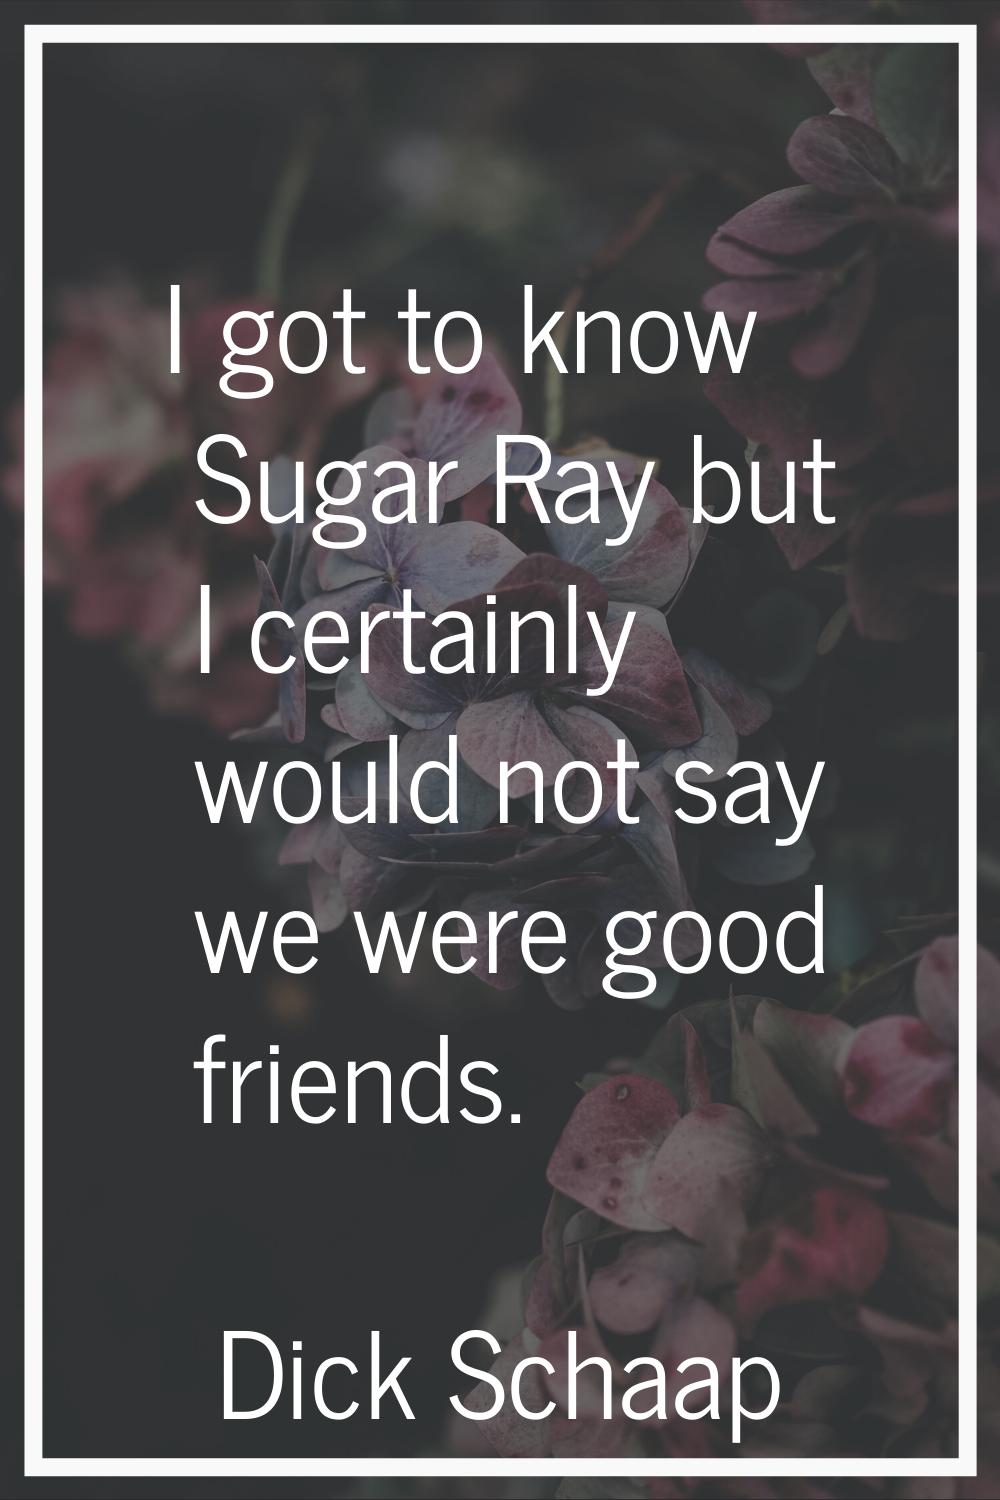 I got to know Sugar Ray but I certainly would not say we were good friends.